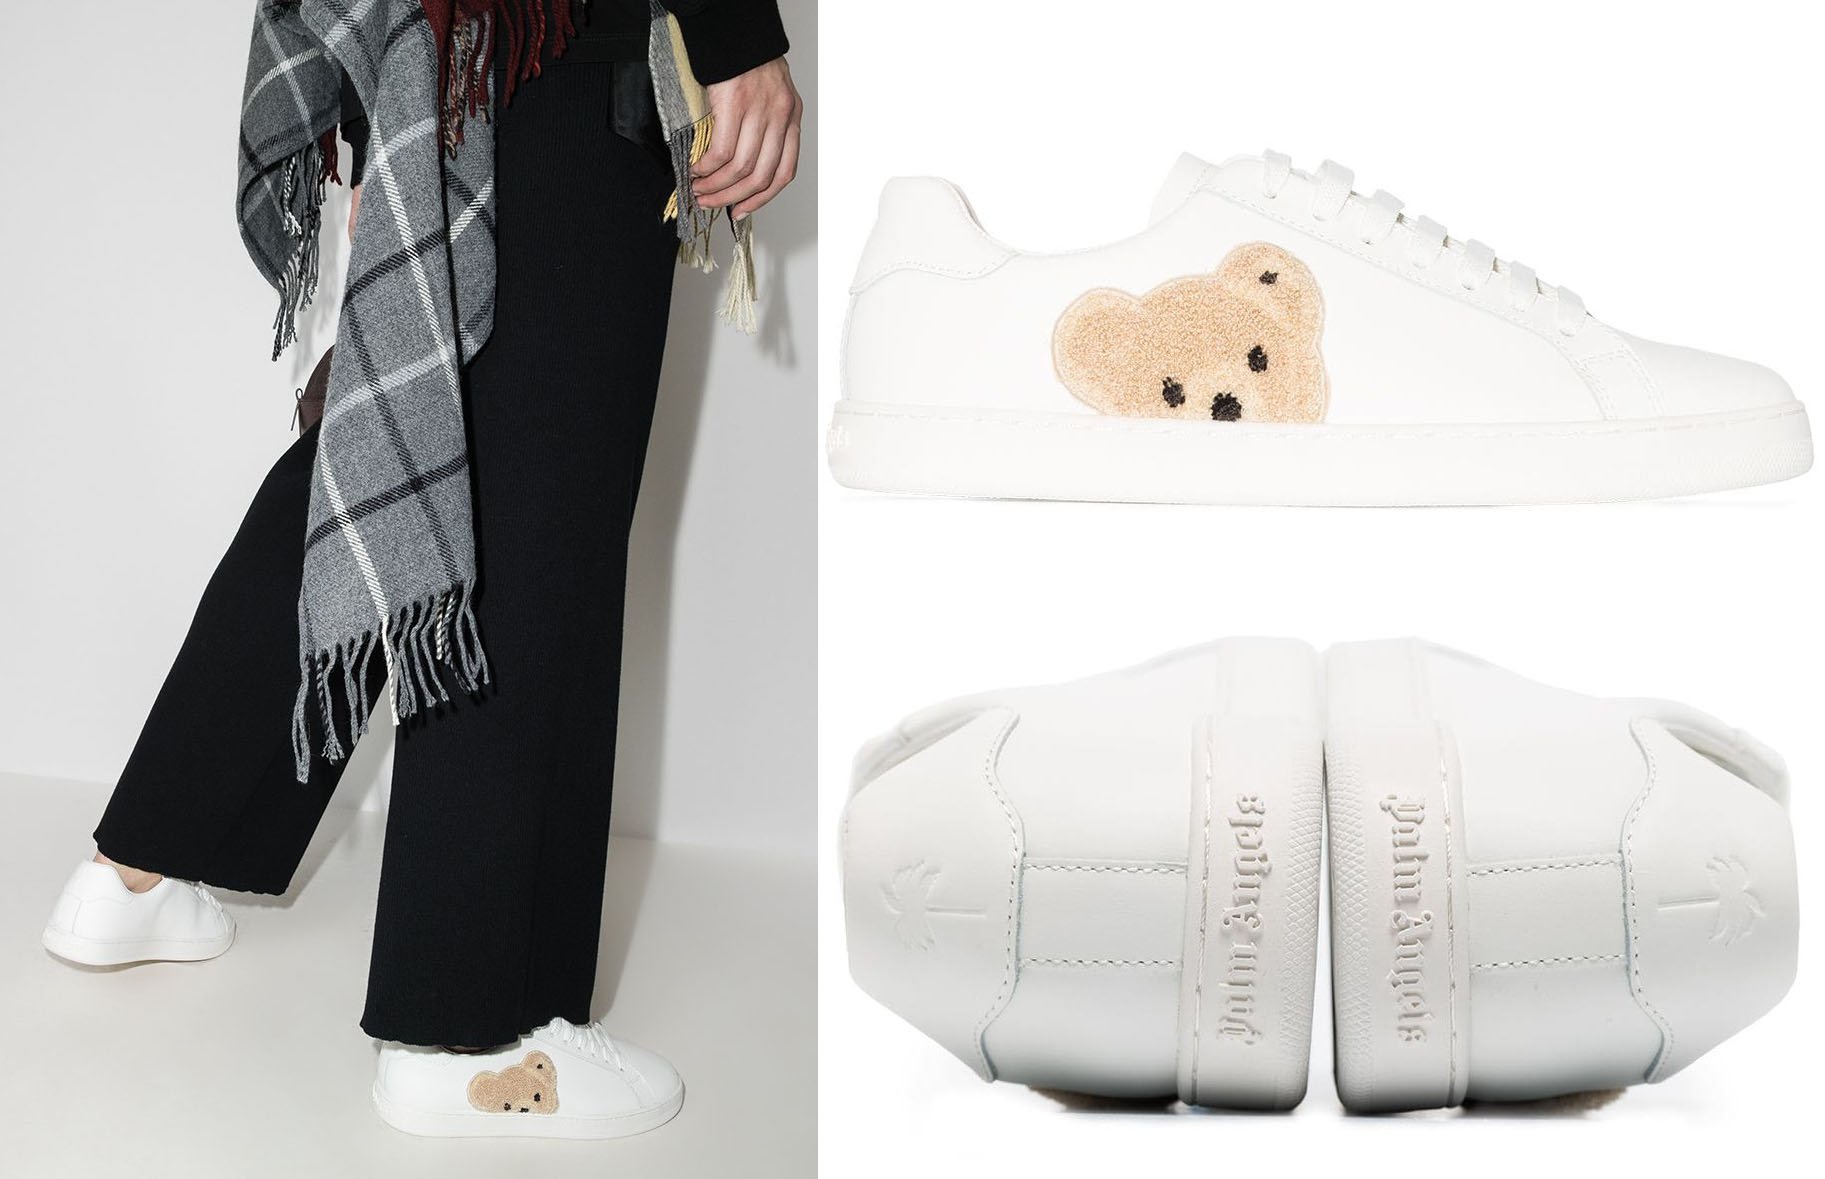 Palm Angels' New Teddy low-top sneakers boast the luxury fashion label's signature teddy motif, adding a quirky element to the classic all-white sneaker look